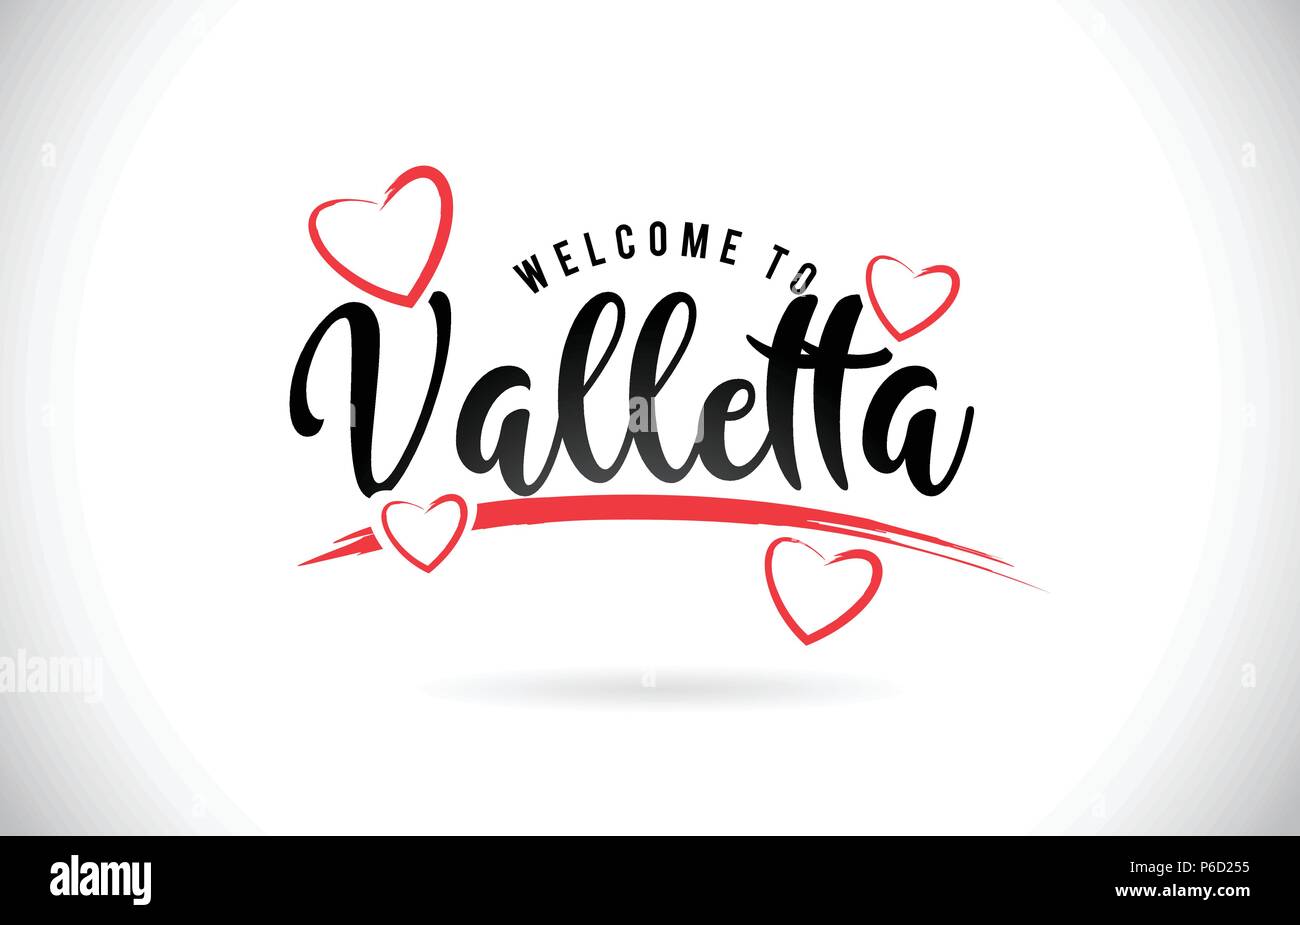 Valletta Welcome To Word Text with Handwritten Font and Red Love Hearts Vector Image Illustration Eps. Stock Vector